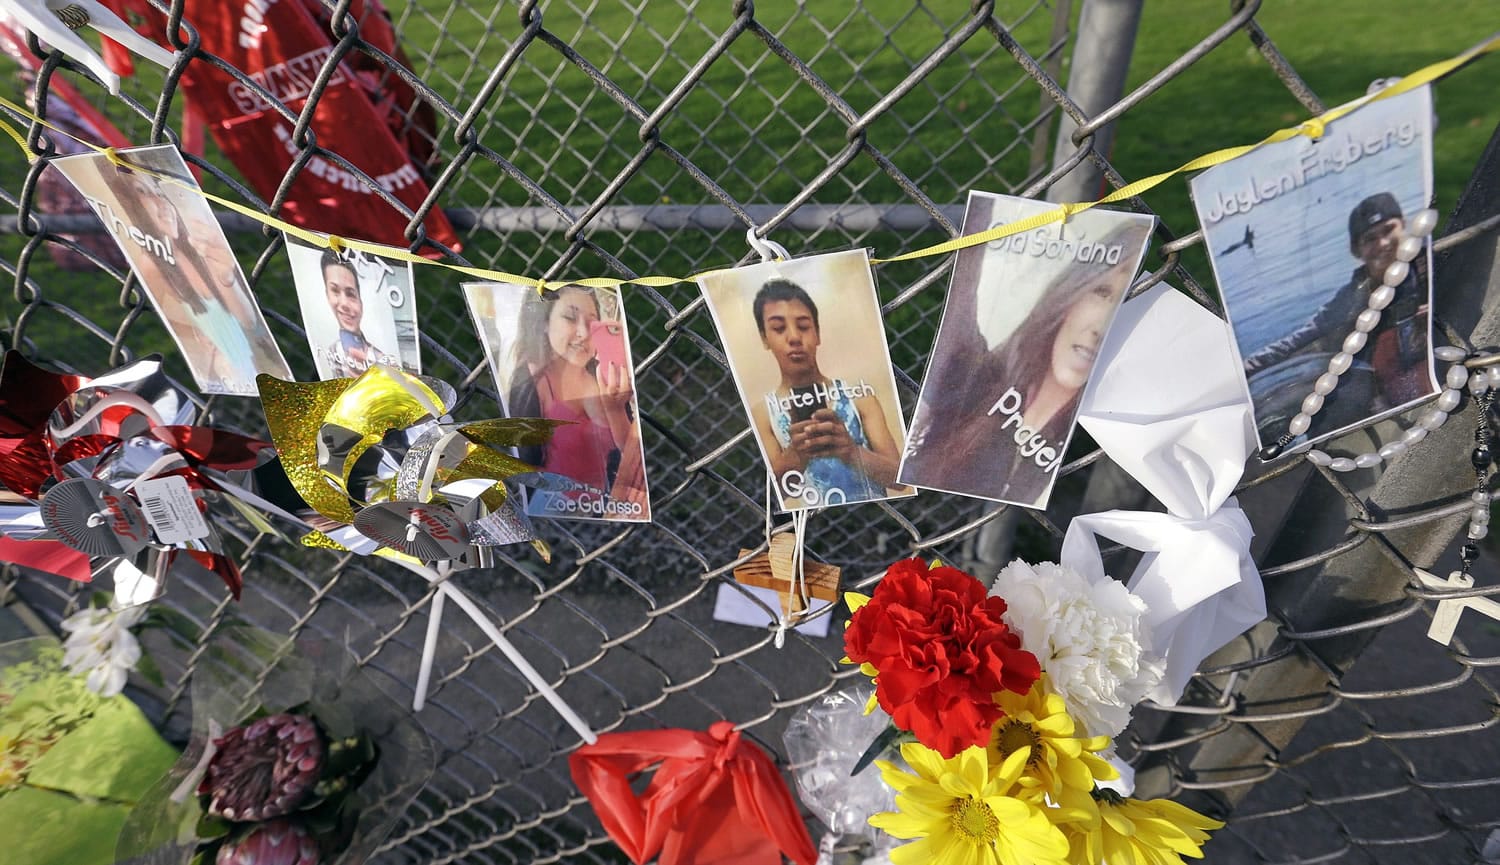 Photos of students shot, and the shooter, are hung together on a fence at Marysville-Pilchuck High School memorializing a shooting there last week, Wednesday in Marysville.